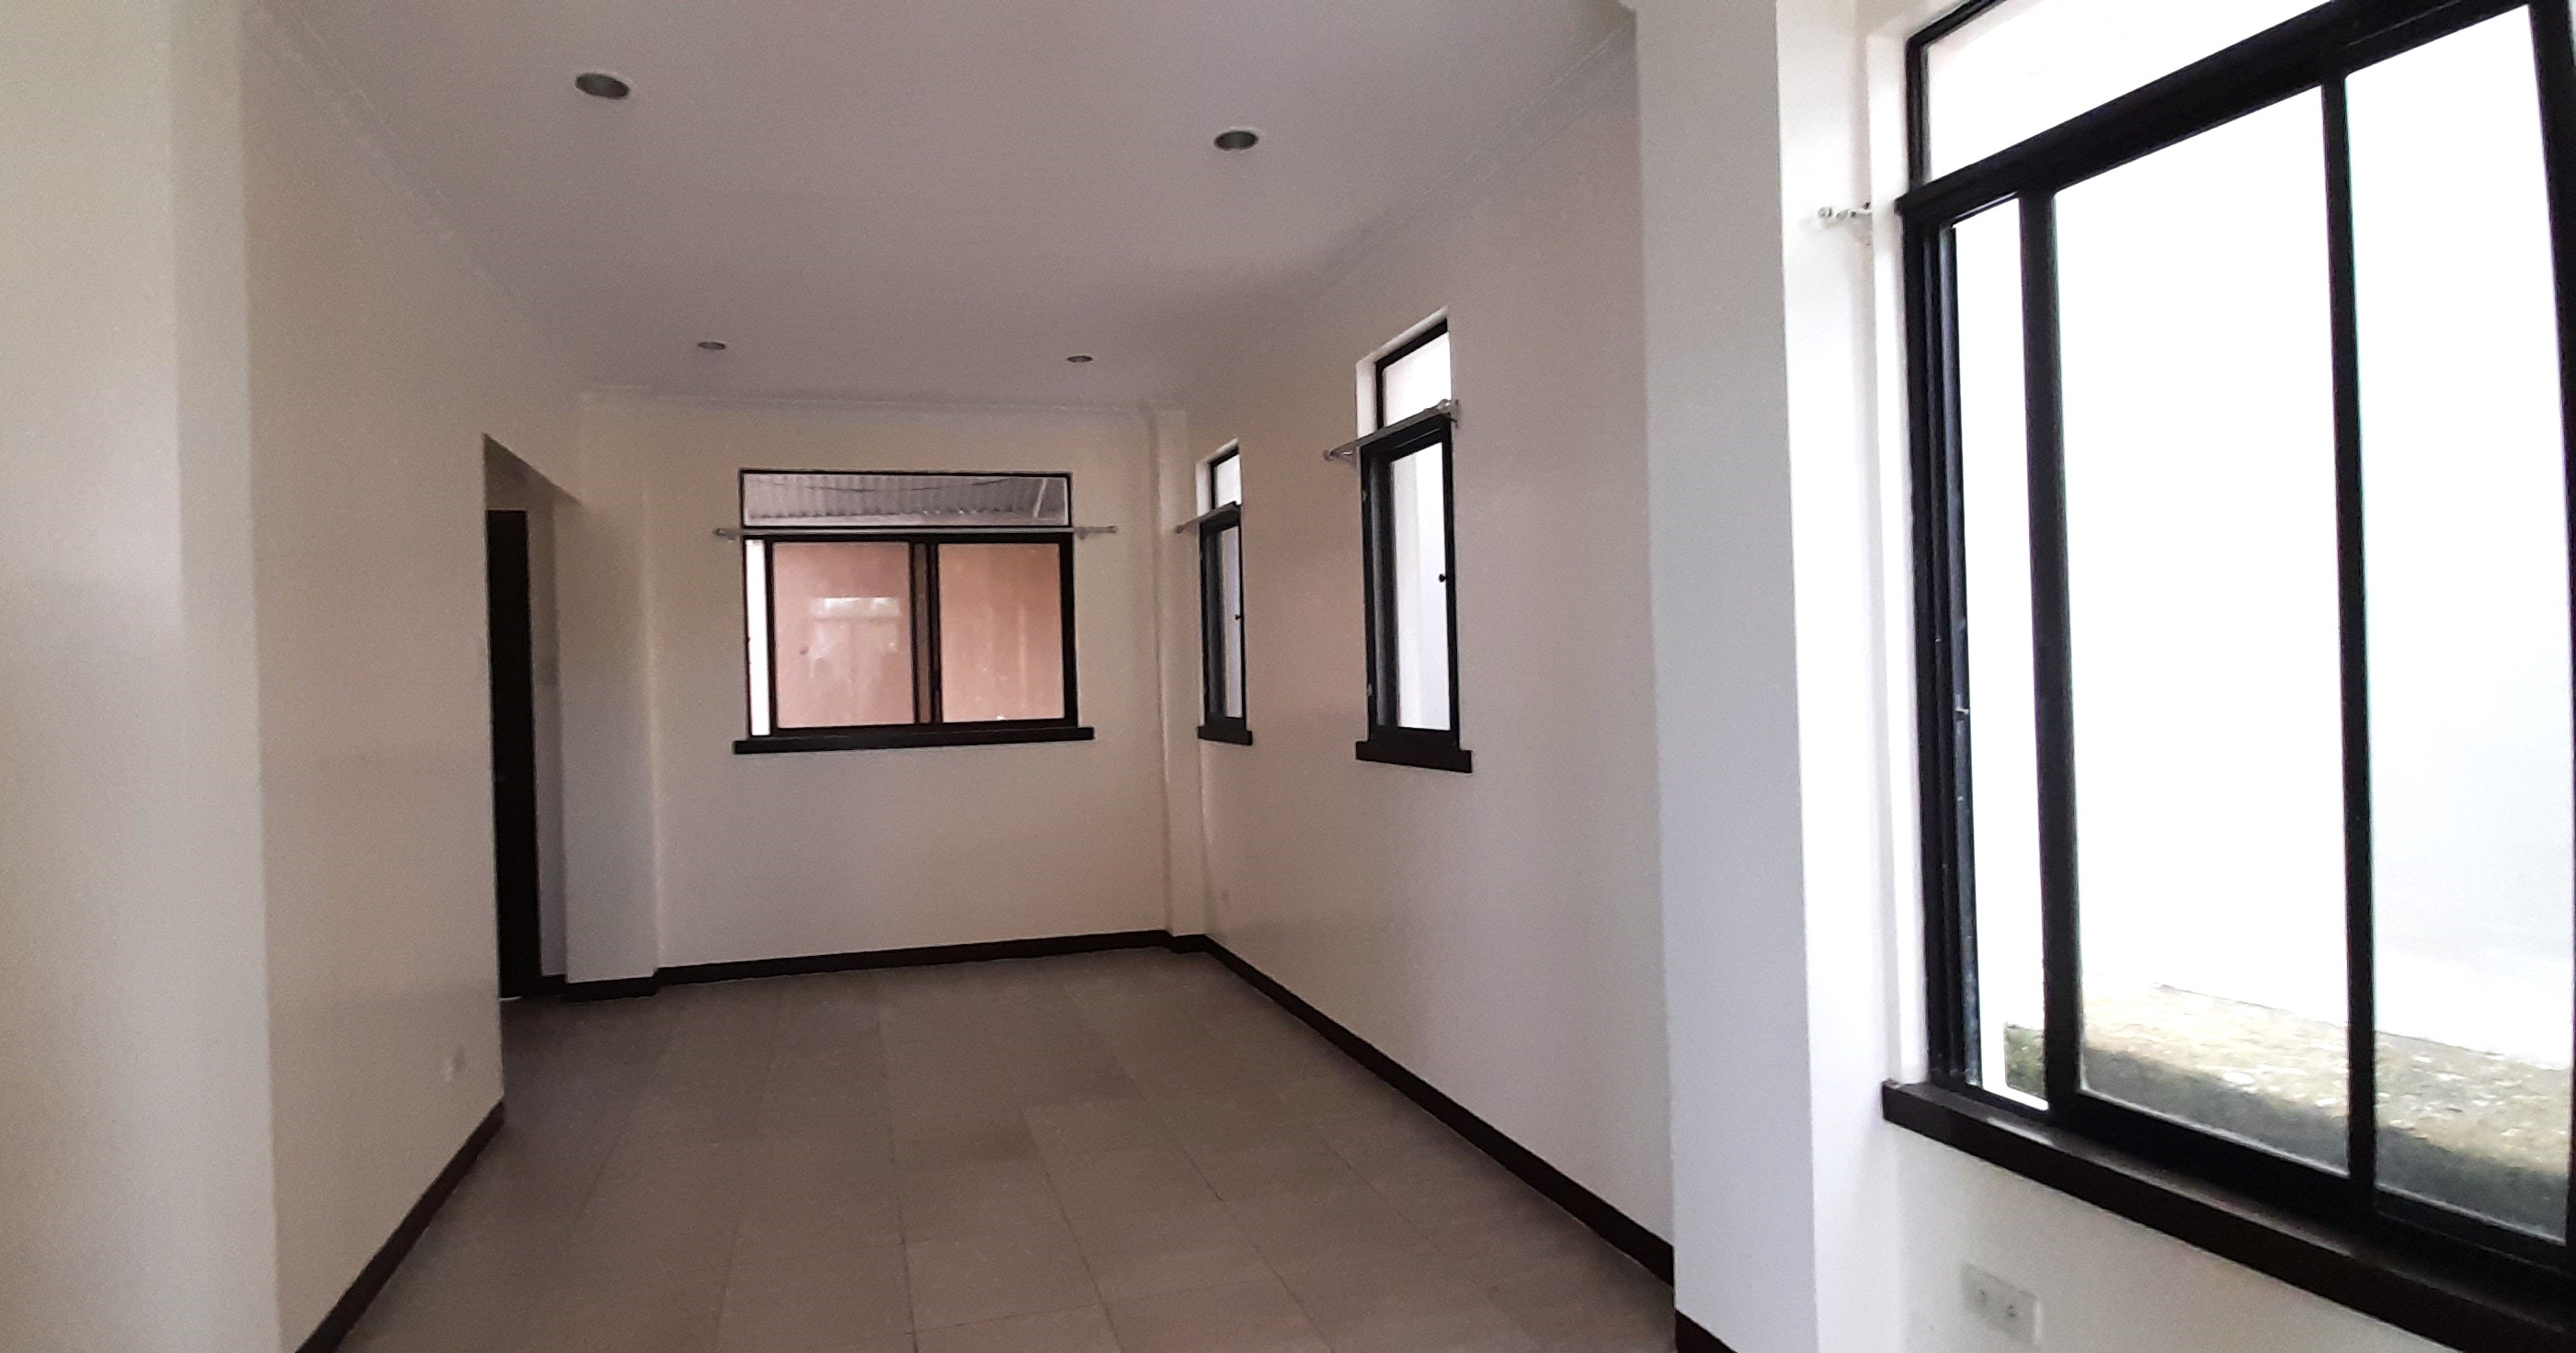 3-bedroom-unfurnished-house-in-guadalupe-cebu-city